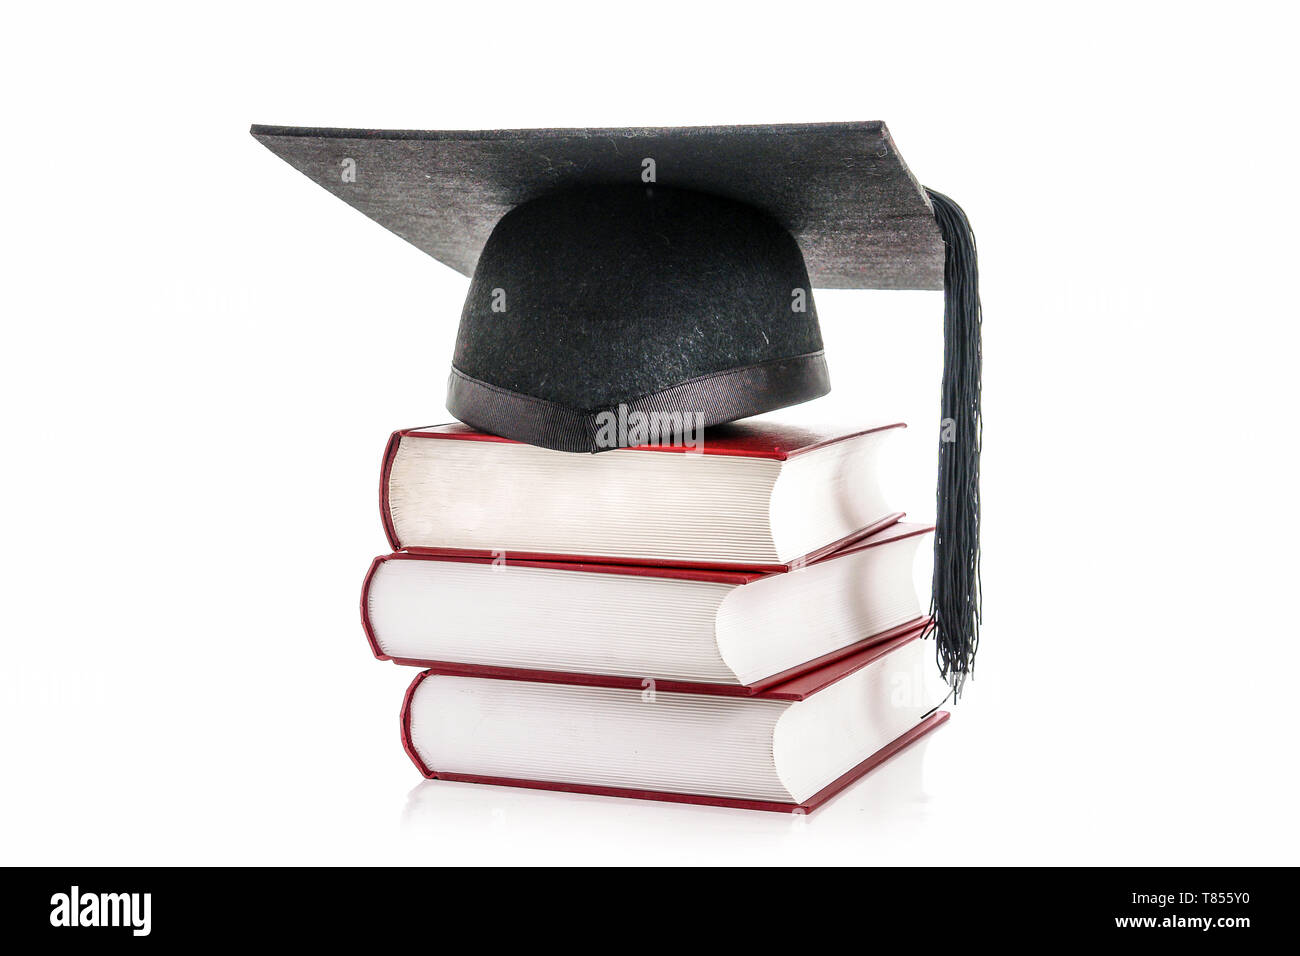 Black graduation hat on pile of three hard cover books over white Stock Photo